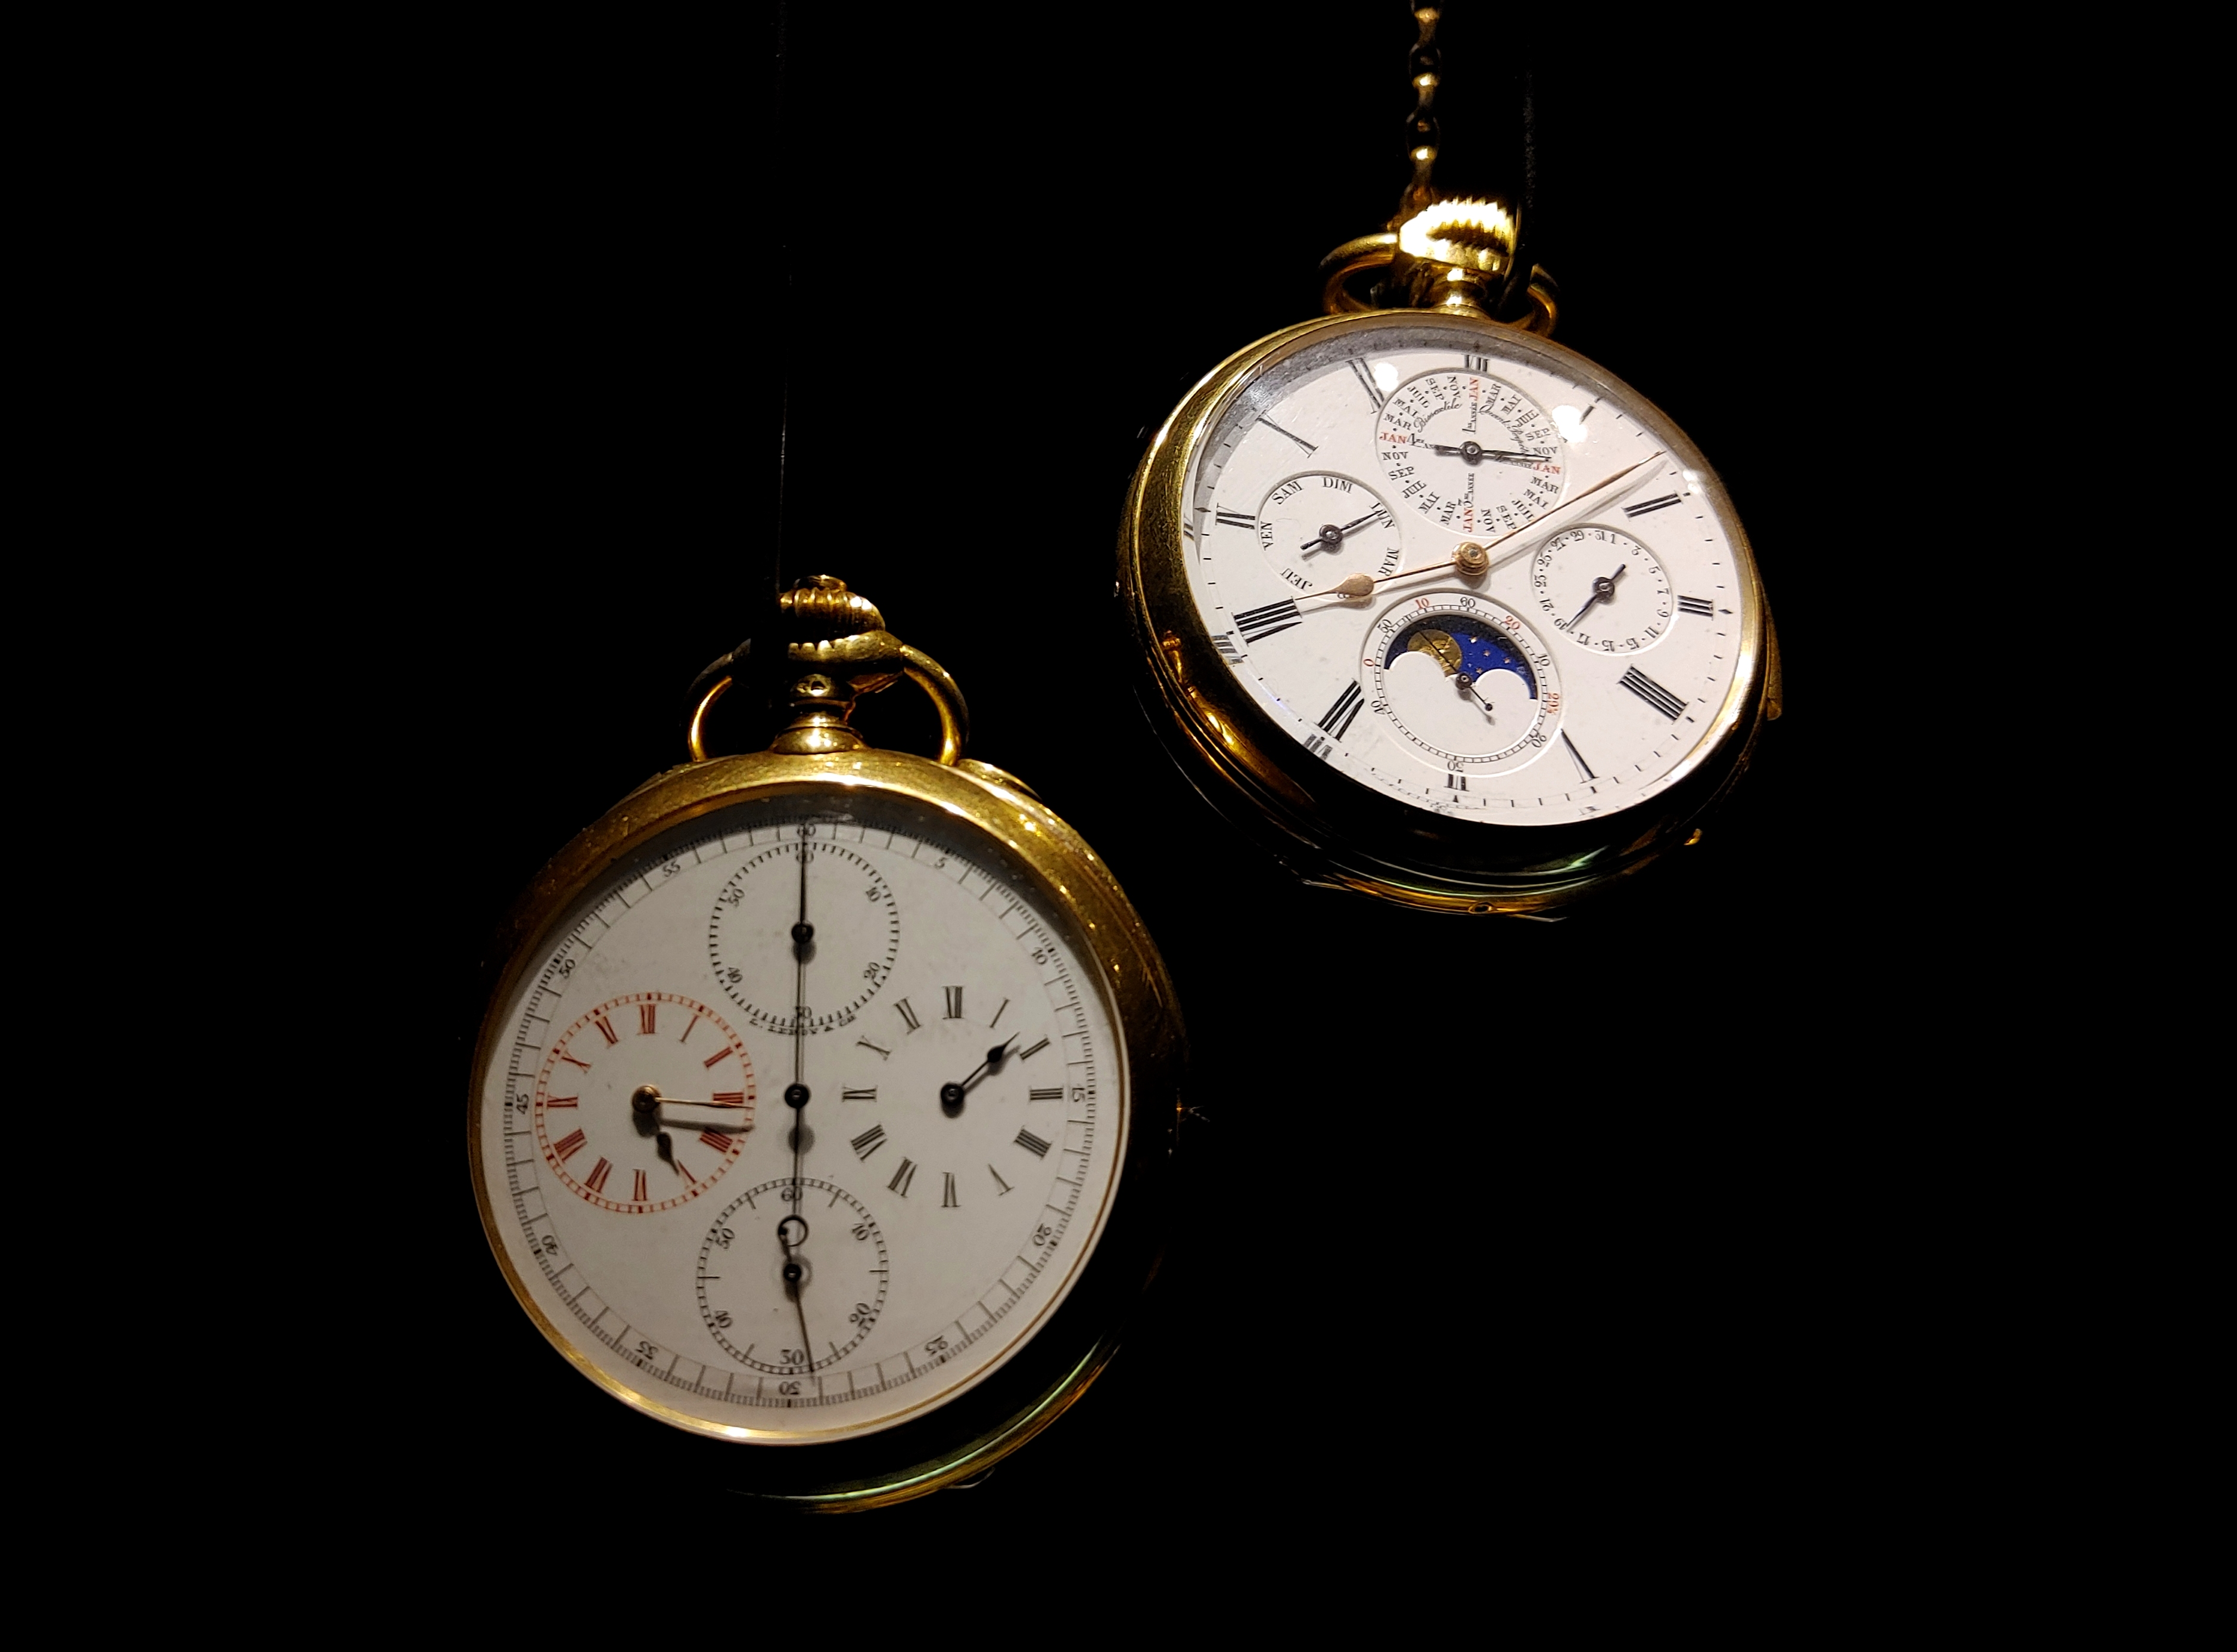 Two L. Leroy et Cie pocket watches